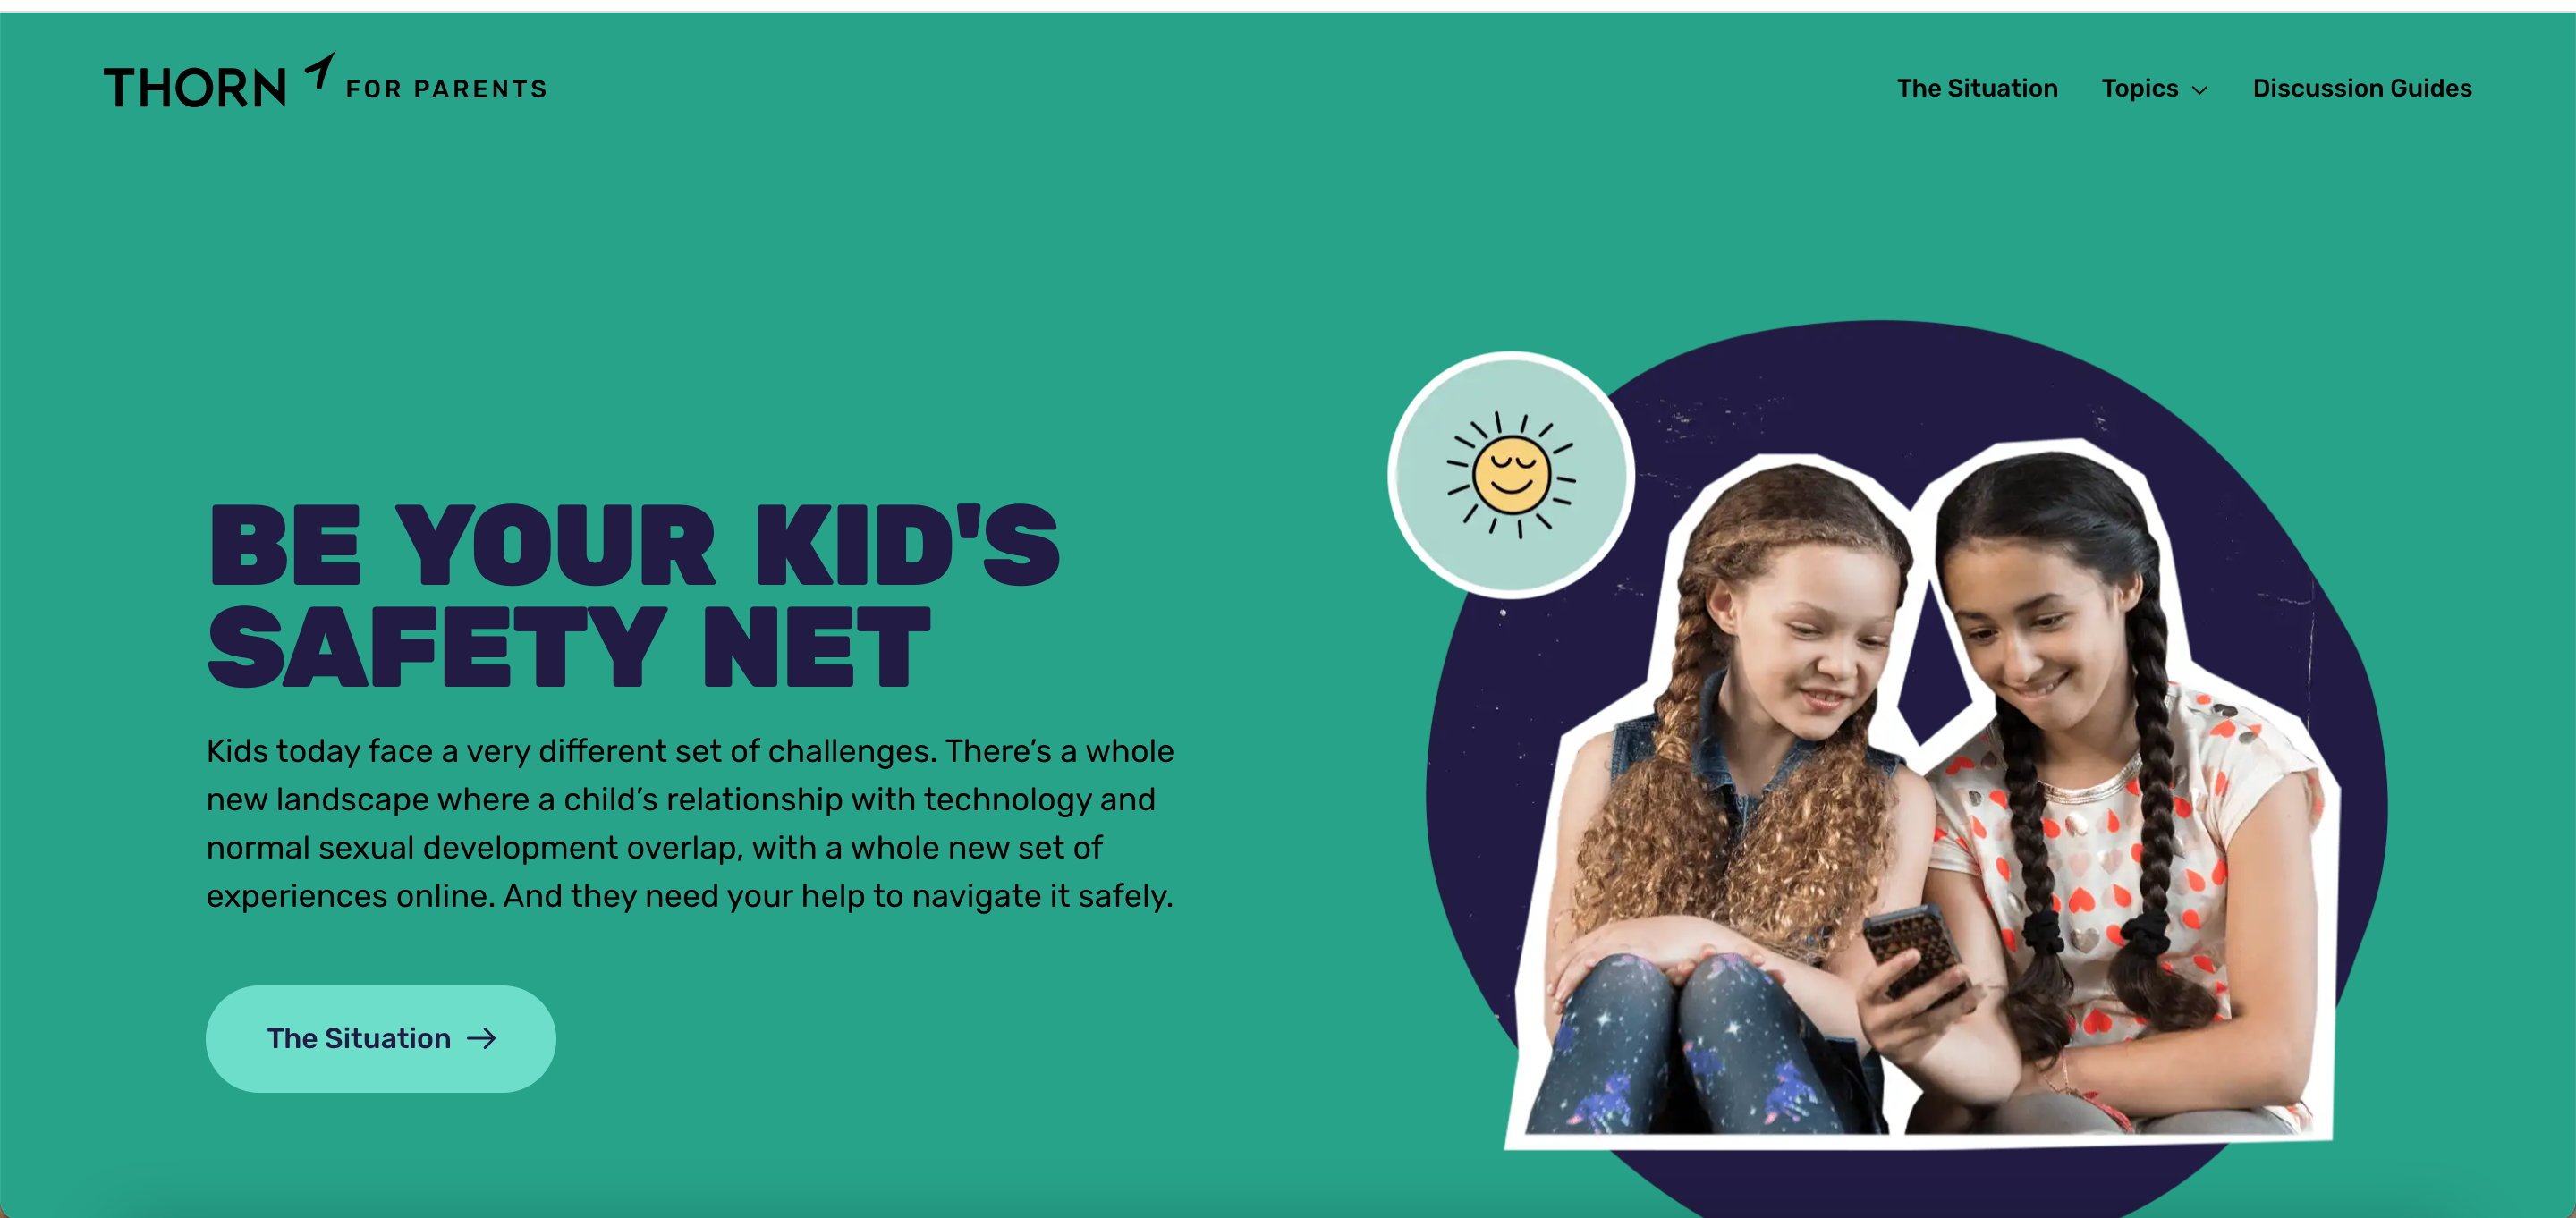 Be Your Kid's Safety Net - Thorn for Parents